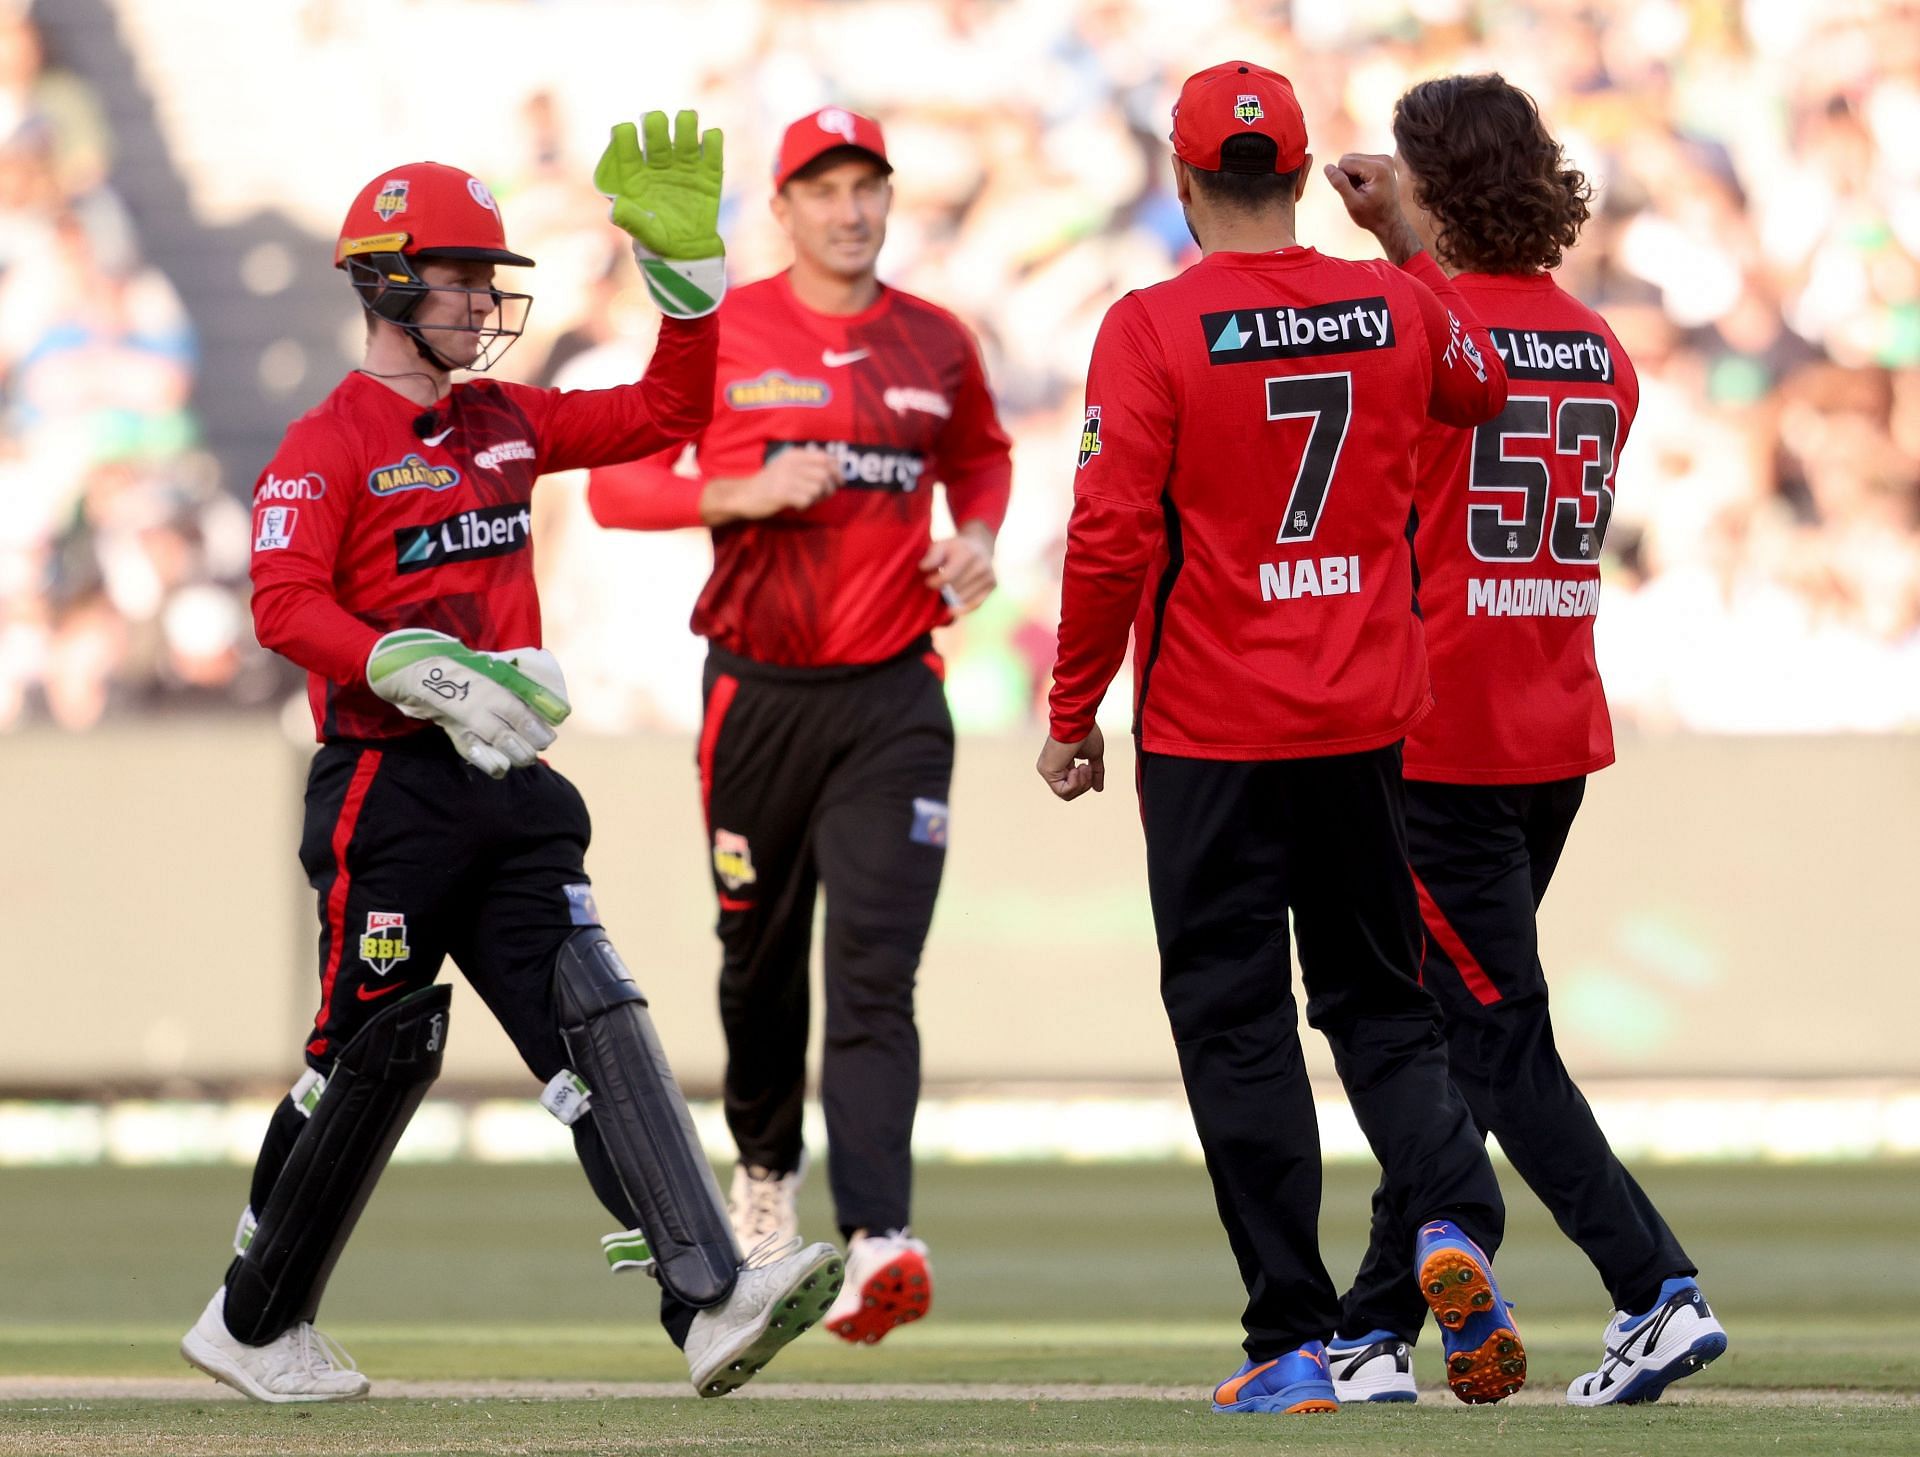 The Renegades will be looking to get a win under their belt.